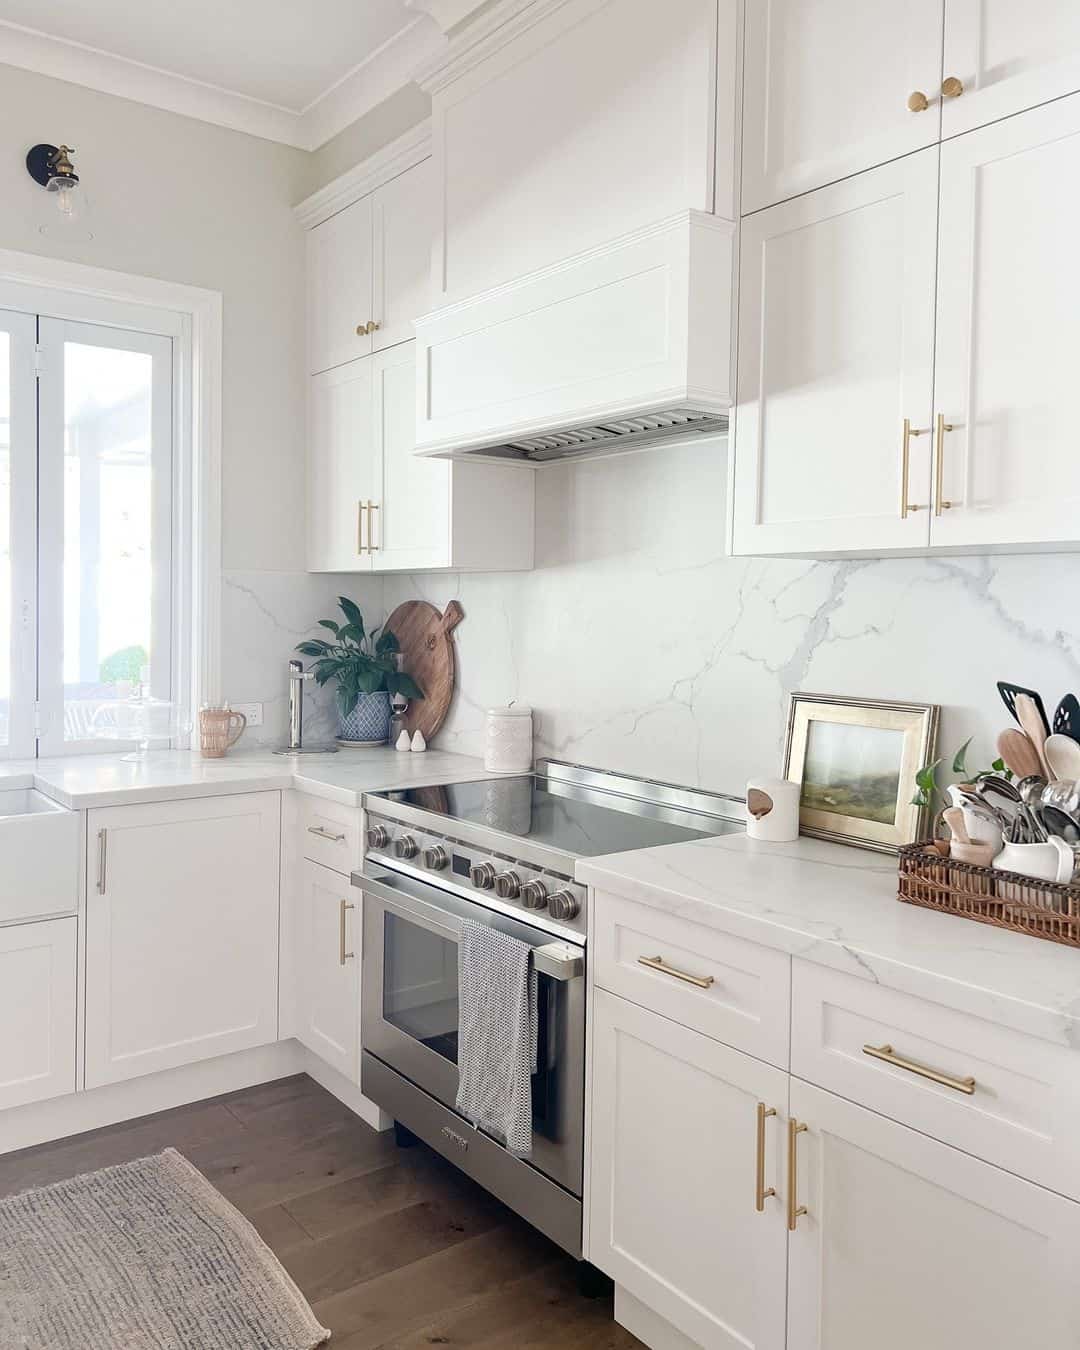 White Cabinets with Brass Kitchen Hardware - Soul & Lane